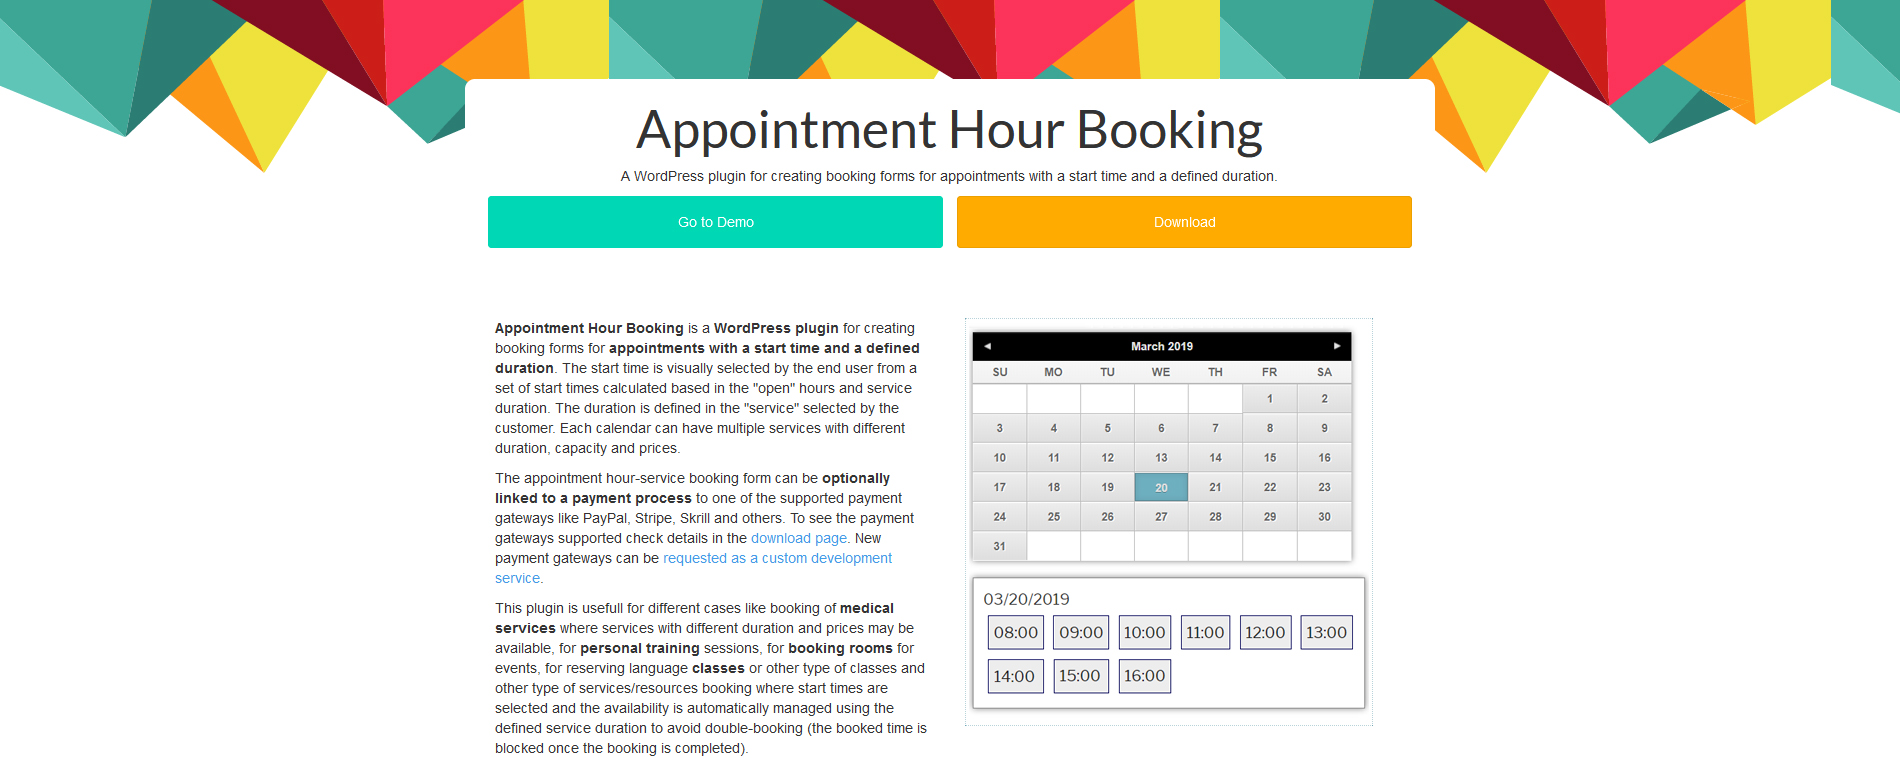 Artwork of Appointment Hour Booking - easy-to-use tool for appointment booking with customizable email templates for tailor-made notifications.